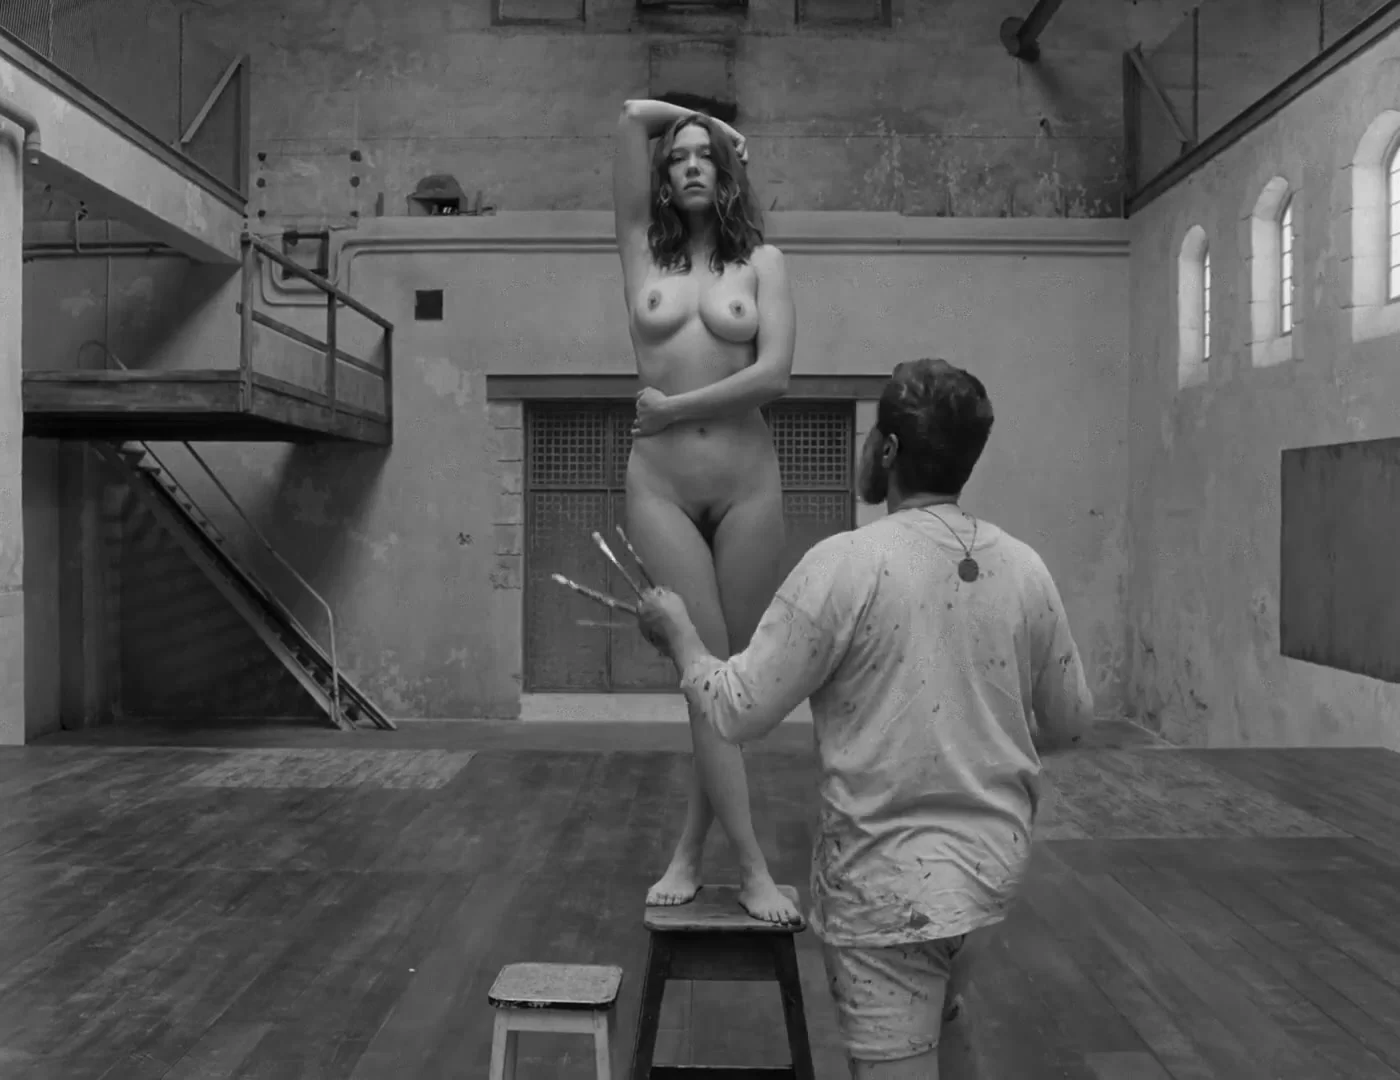 Lea Seydoux full frontal nude in The French Dispatch (2021) / Embed Player.